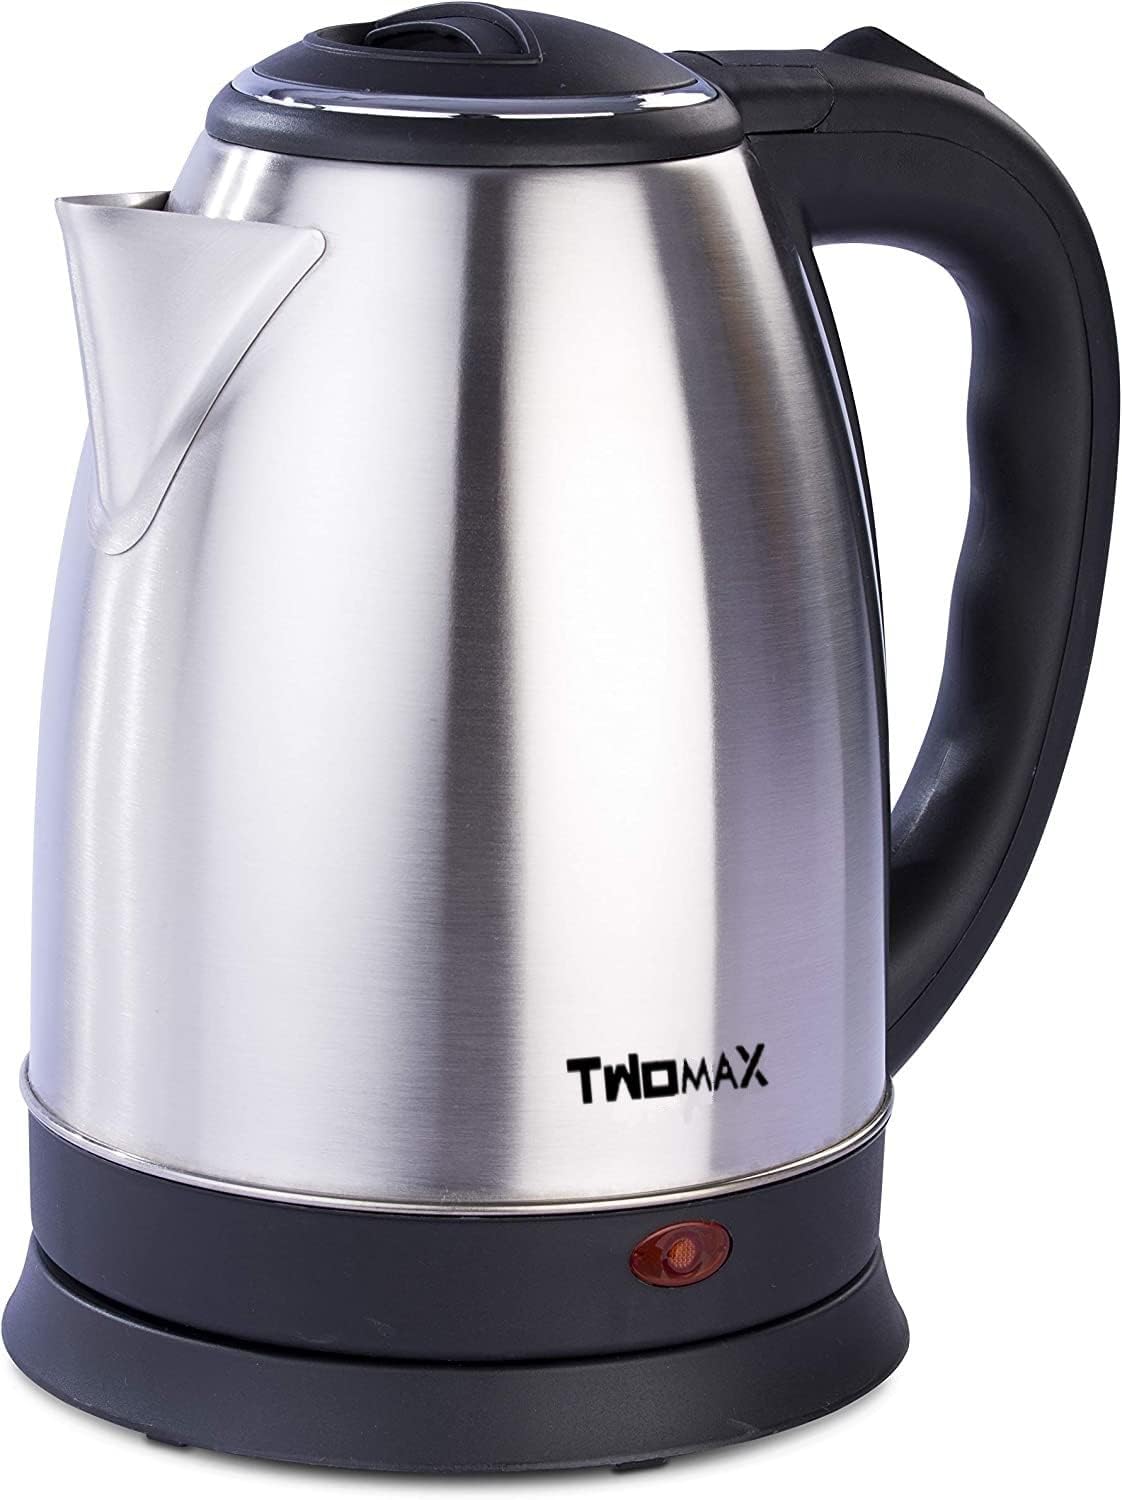 Tomax Stainless Steel Kettle 1.8L 1500W (Silver) TM-1510